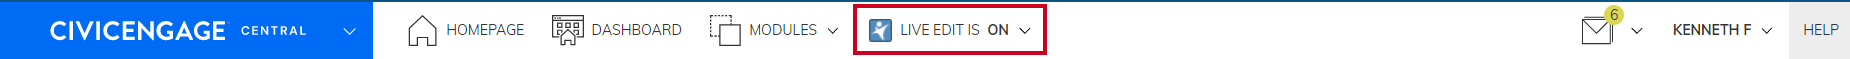 Ensure that Live Edit is ON